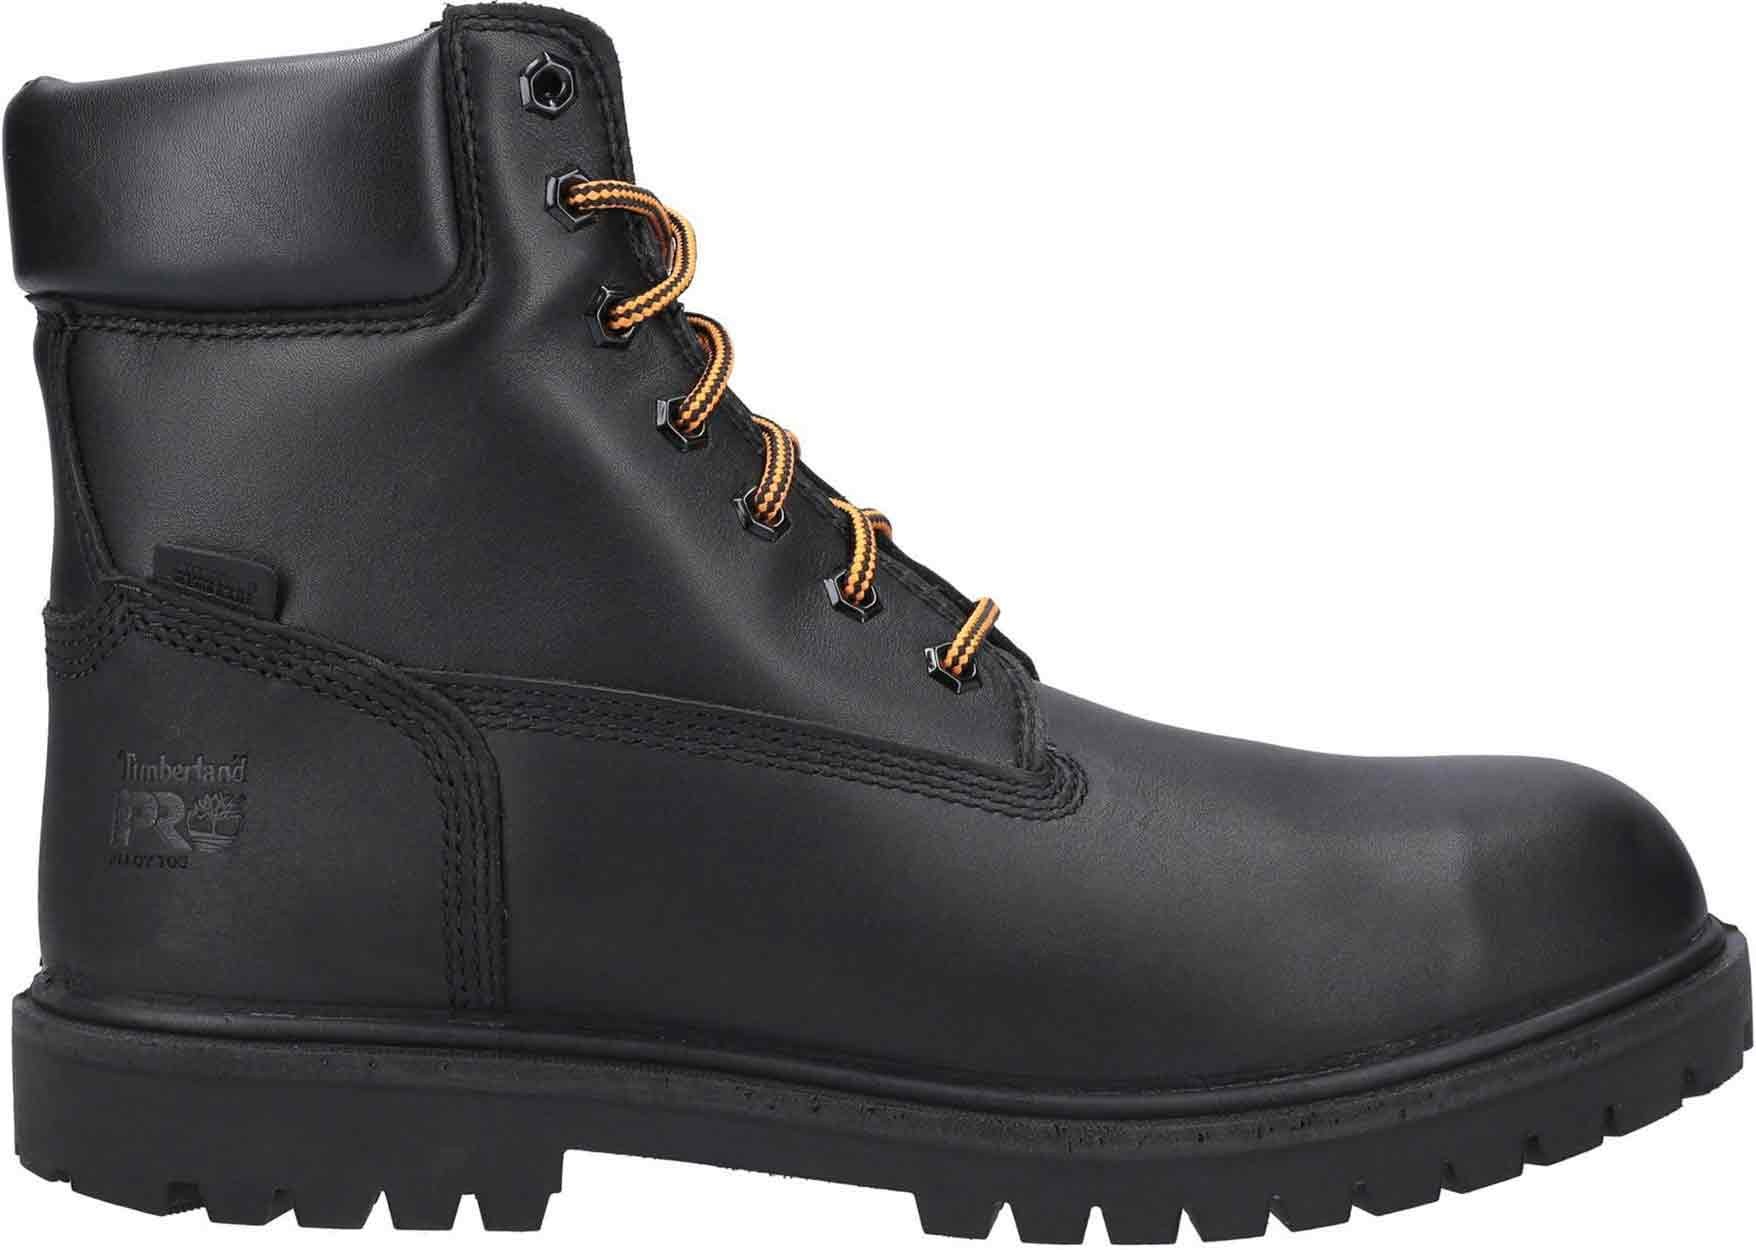 Timberland Pro Iconic S3 Boot Black - Standard Safety Boots - Mens Safety  Boots & Shoes - Safety Footwear - Best Workwear